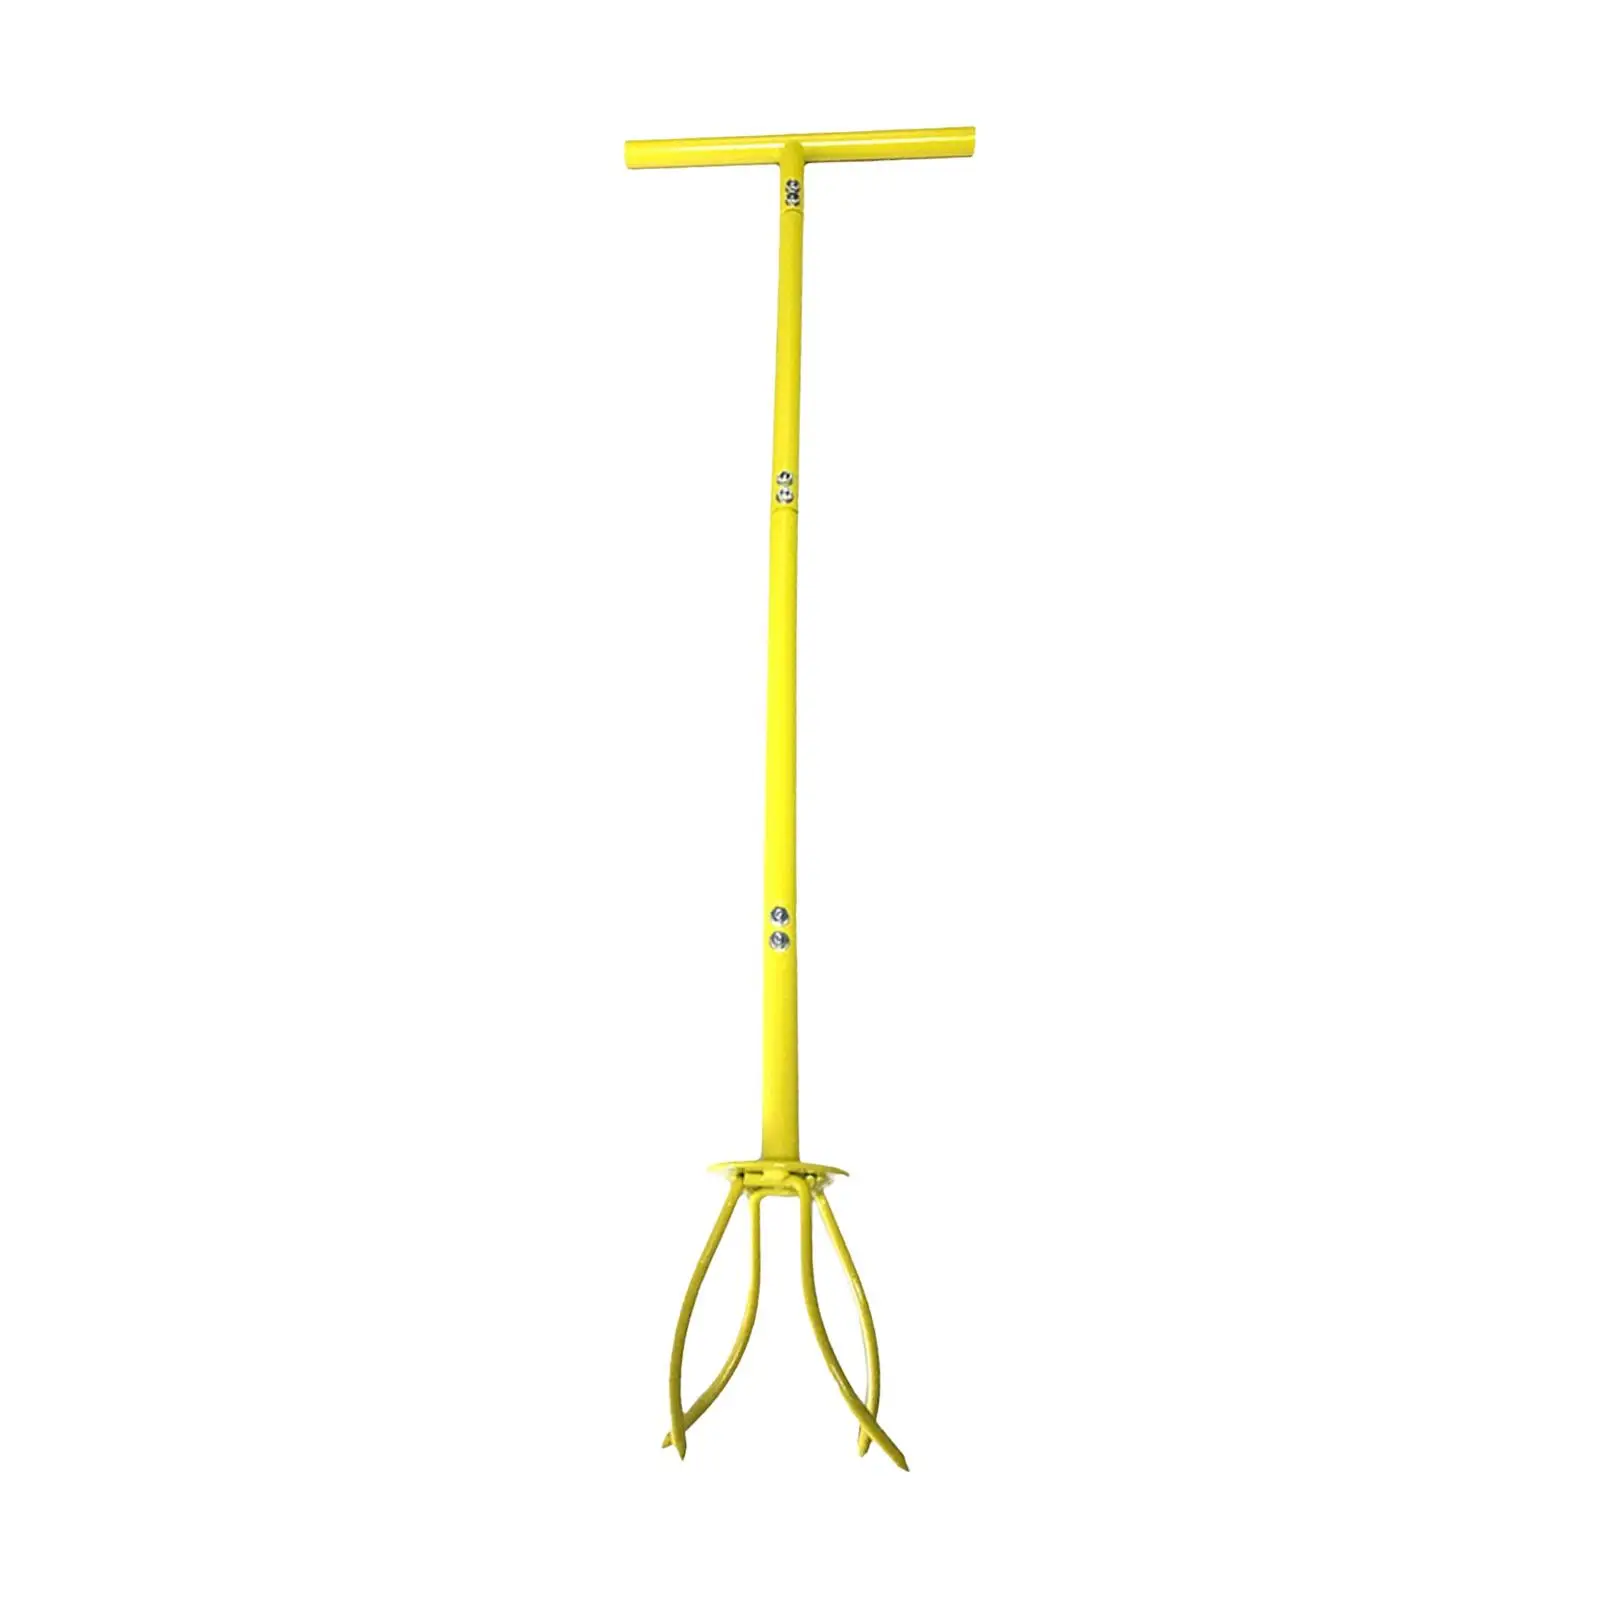 Manual Hand Tiller Durable Heavy Duty Rugged with A Removable Big Claw with Adjustable Long Handle for Gardening Bed, Plant